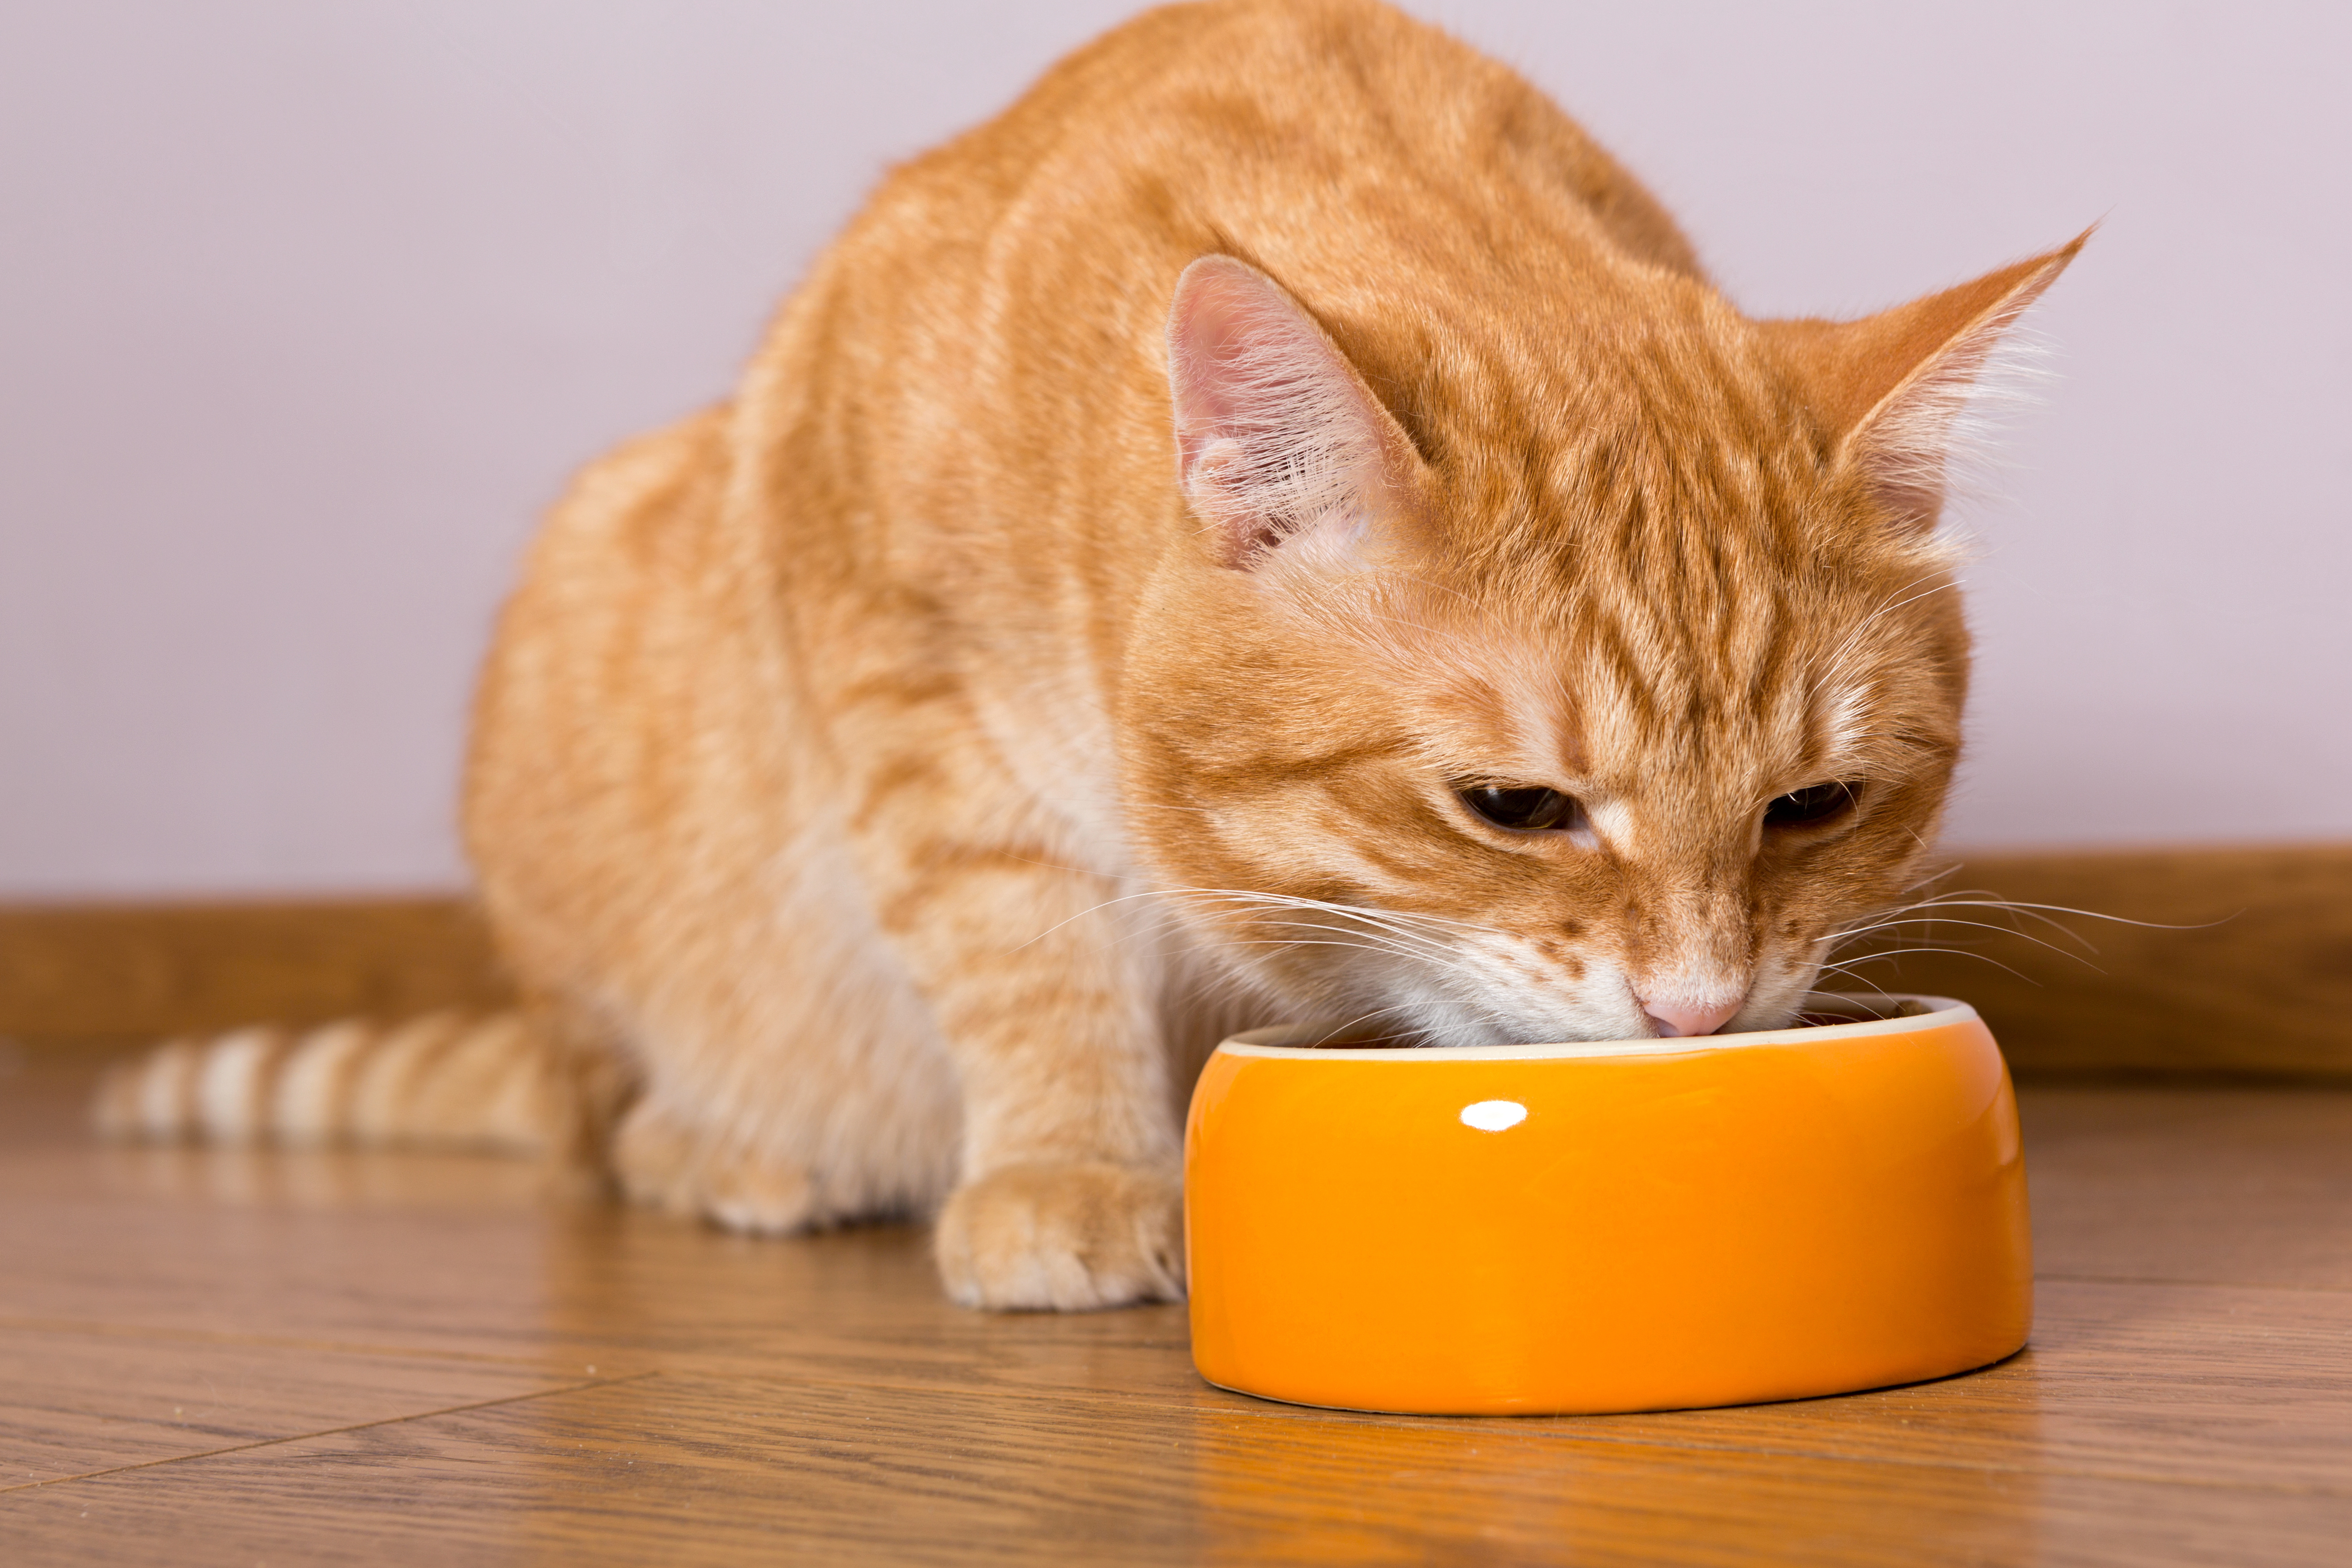 5 Reasons Your Cat May Not Be Drinking out of Their Water Bowl